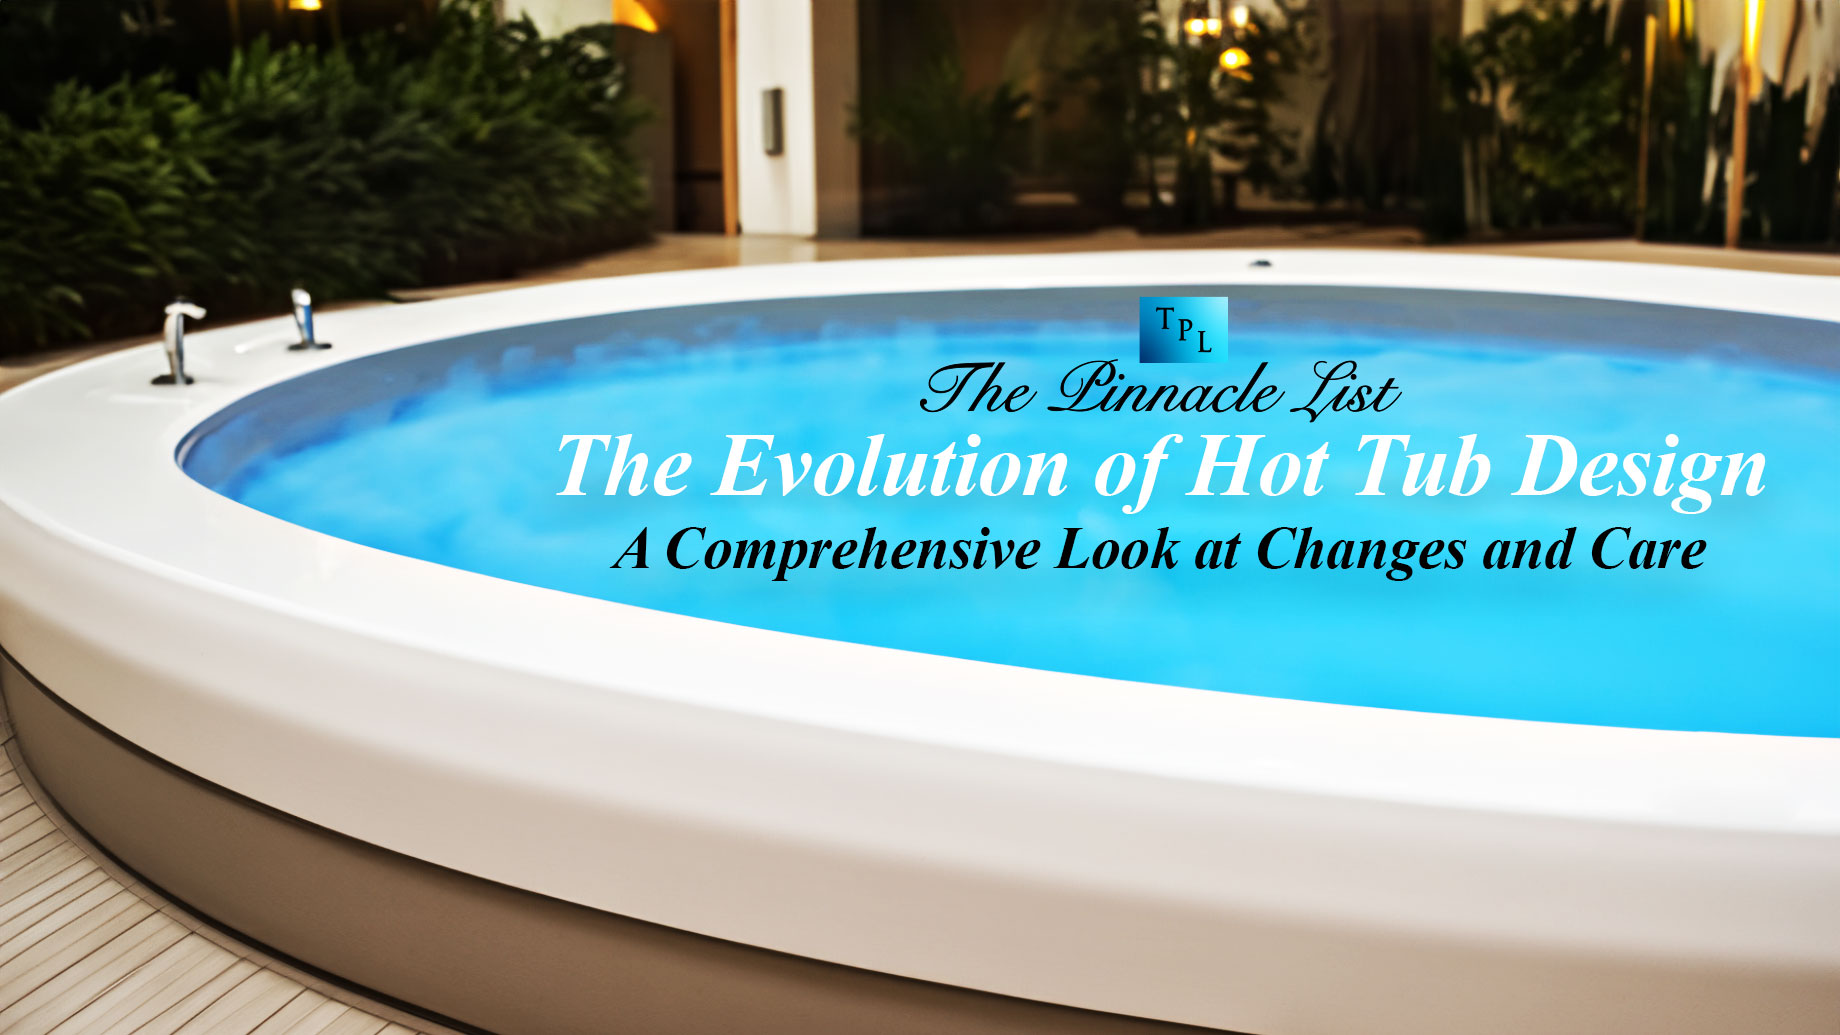 The Evolution of Hot Tub Design
A Comprehensive Look at Changes and Care